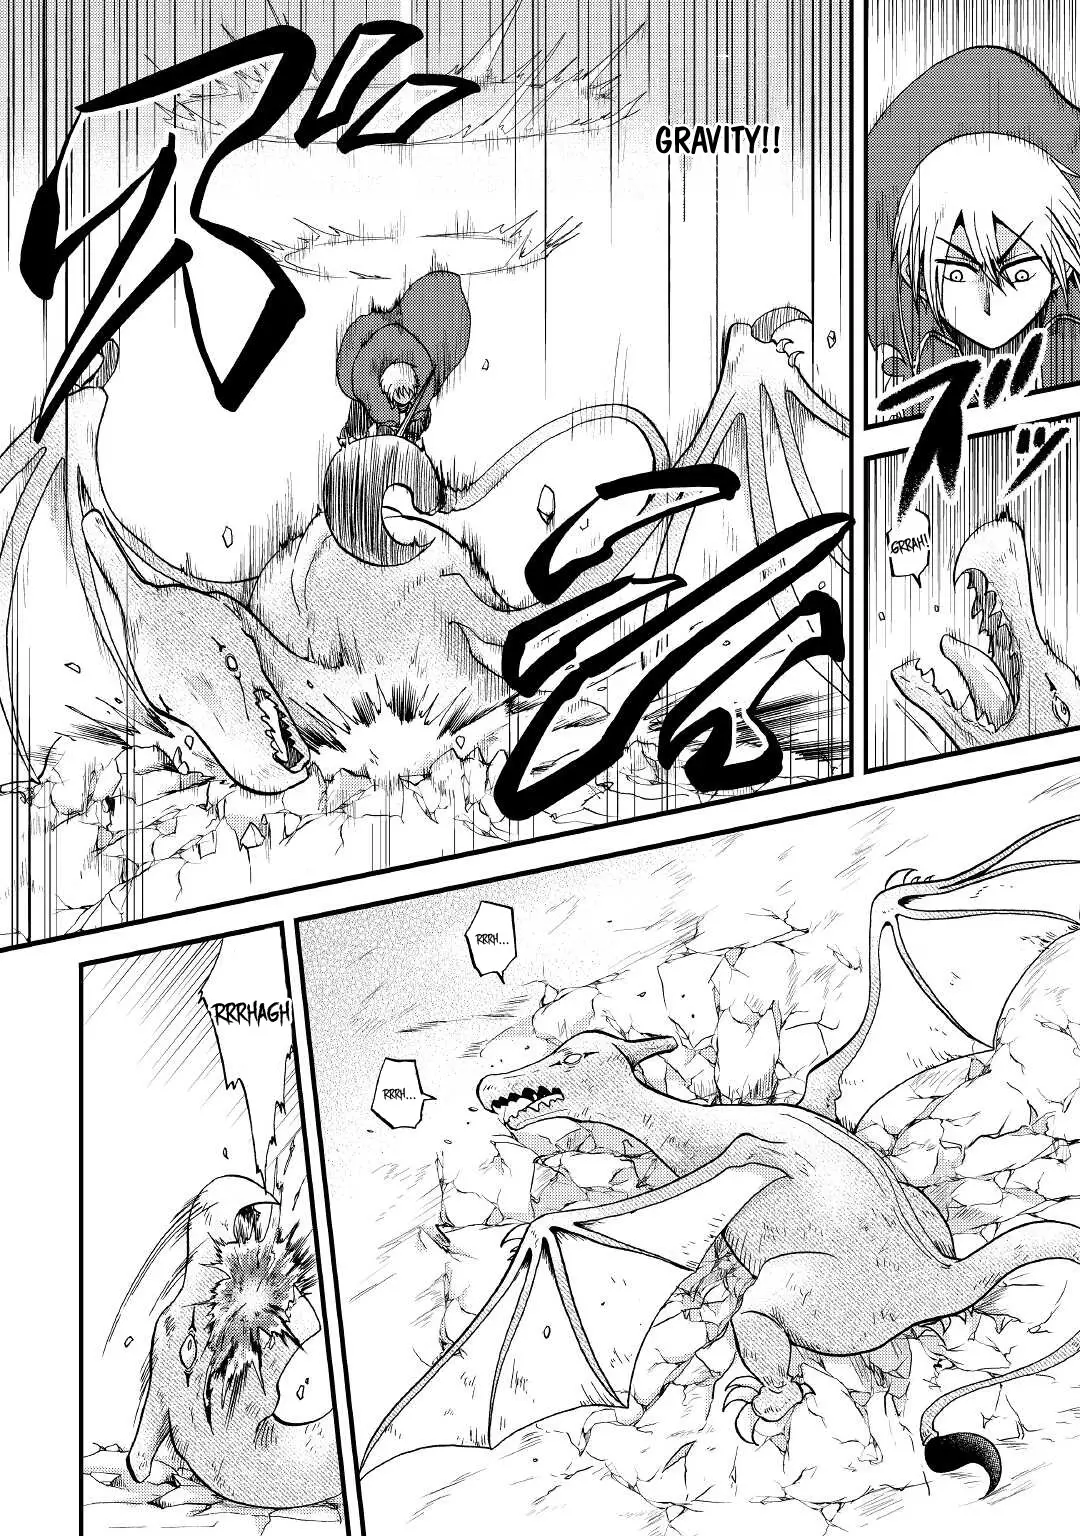 Previous Life Was Sword Emperor. This Life Is Trash Prince. - 19 page 13-7fea821f